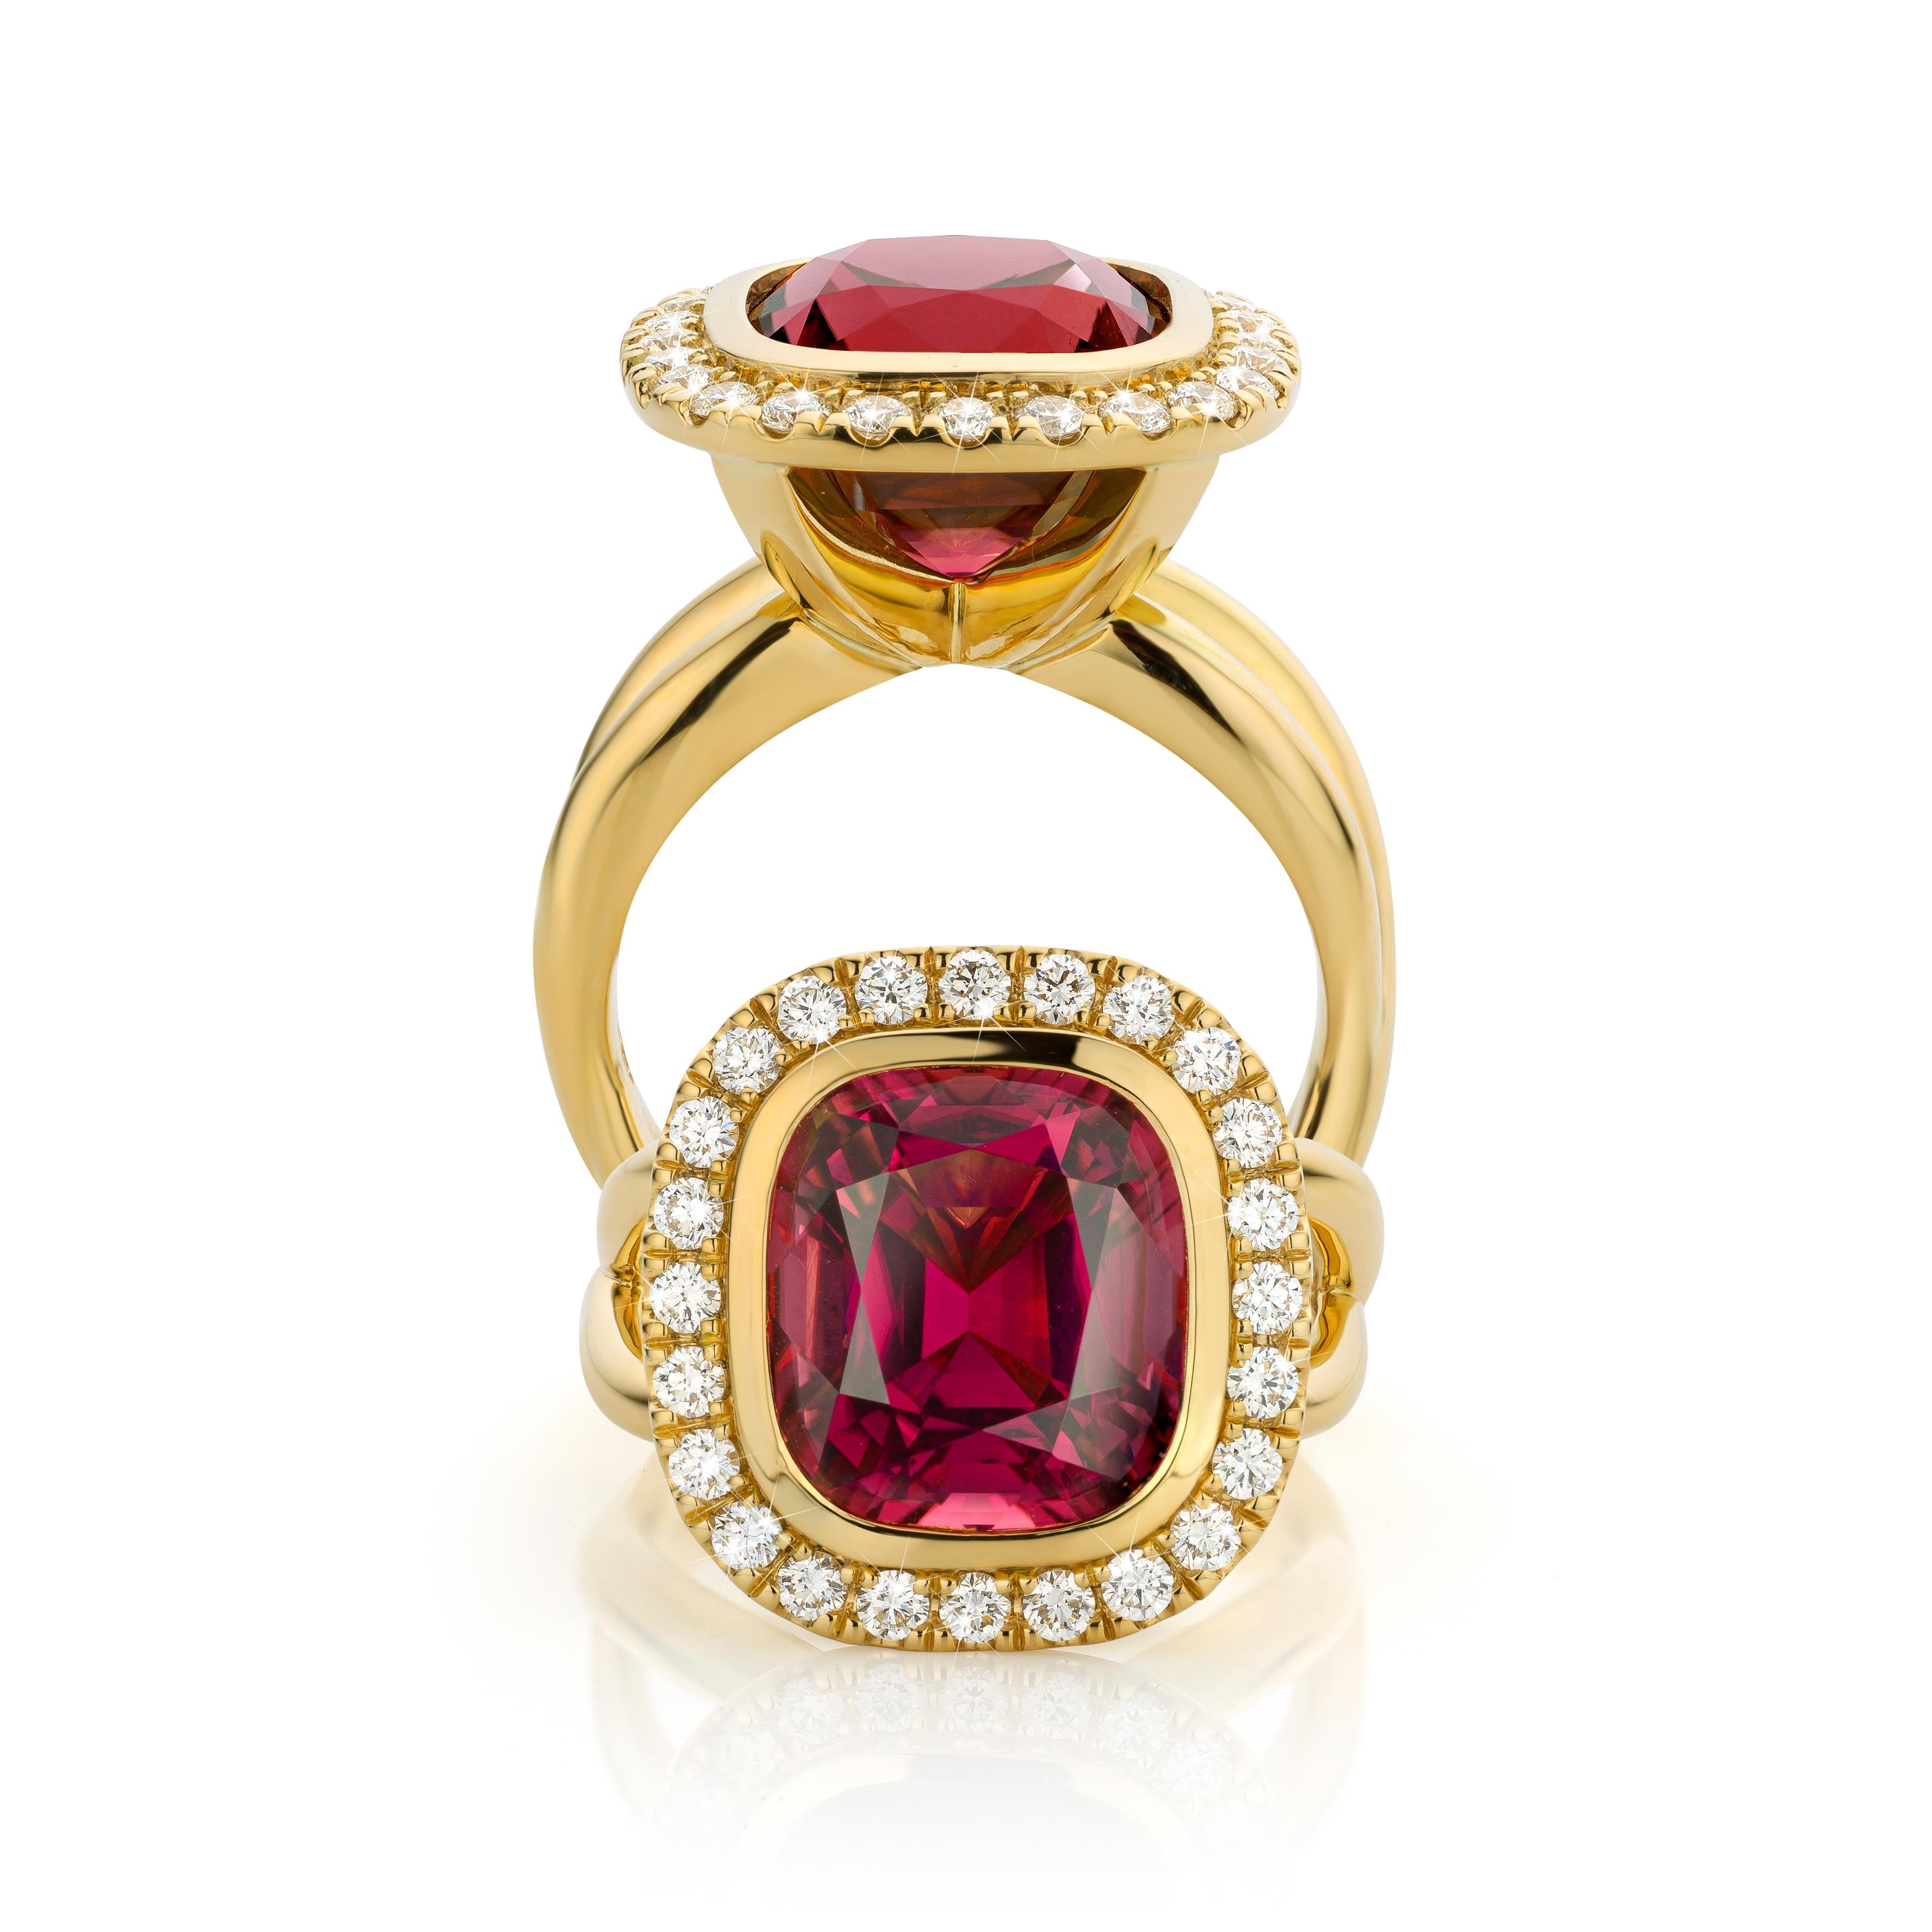 Cober “Playful Pink” with a deep pink Tourmaline and 24 Diamonds YellowGold Ring 1